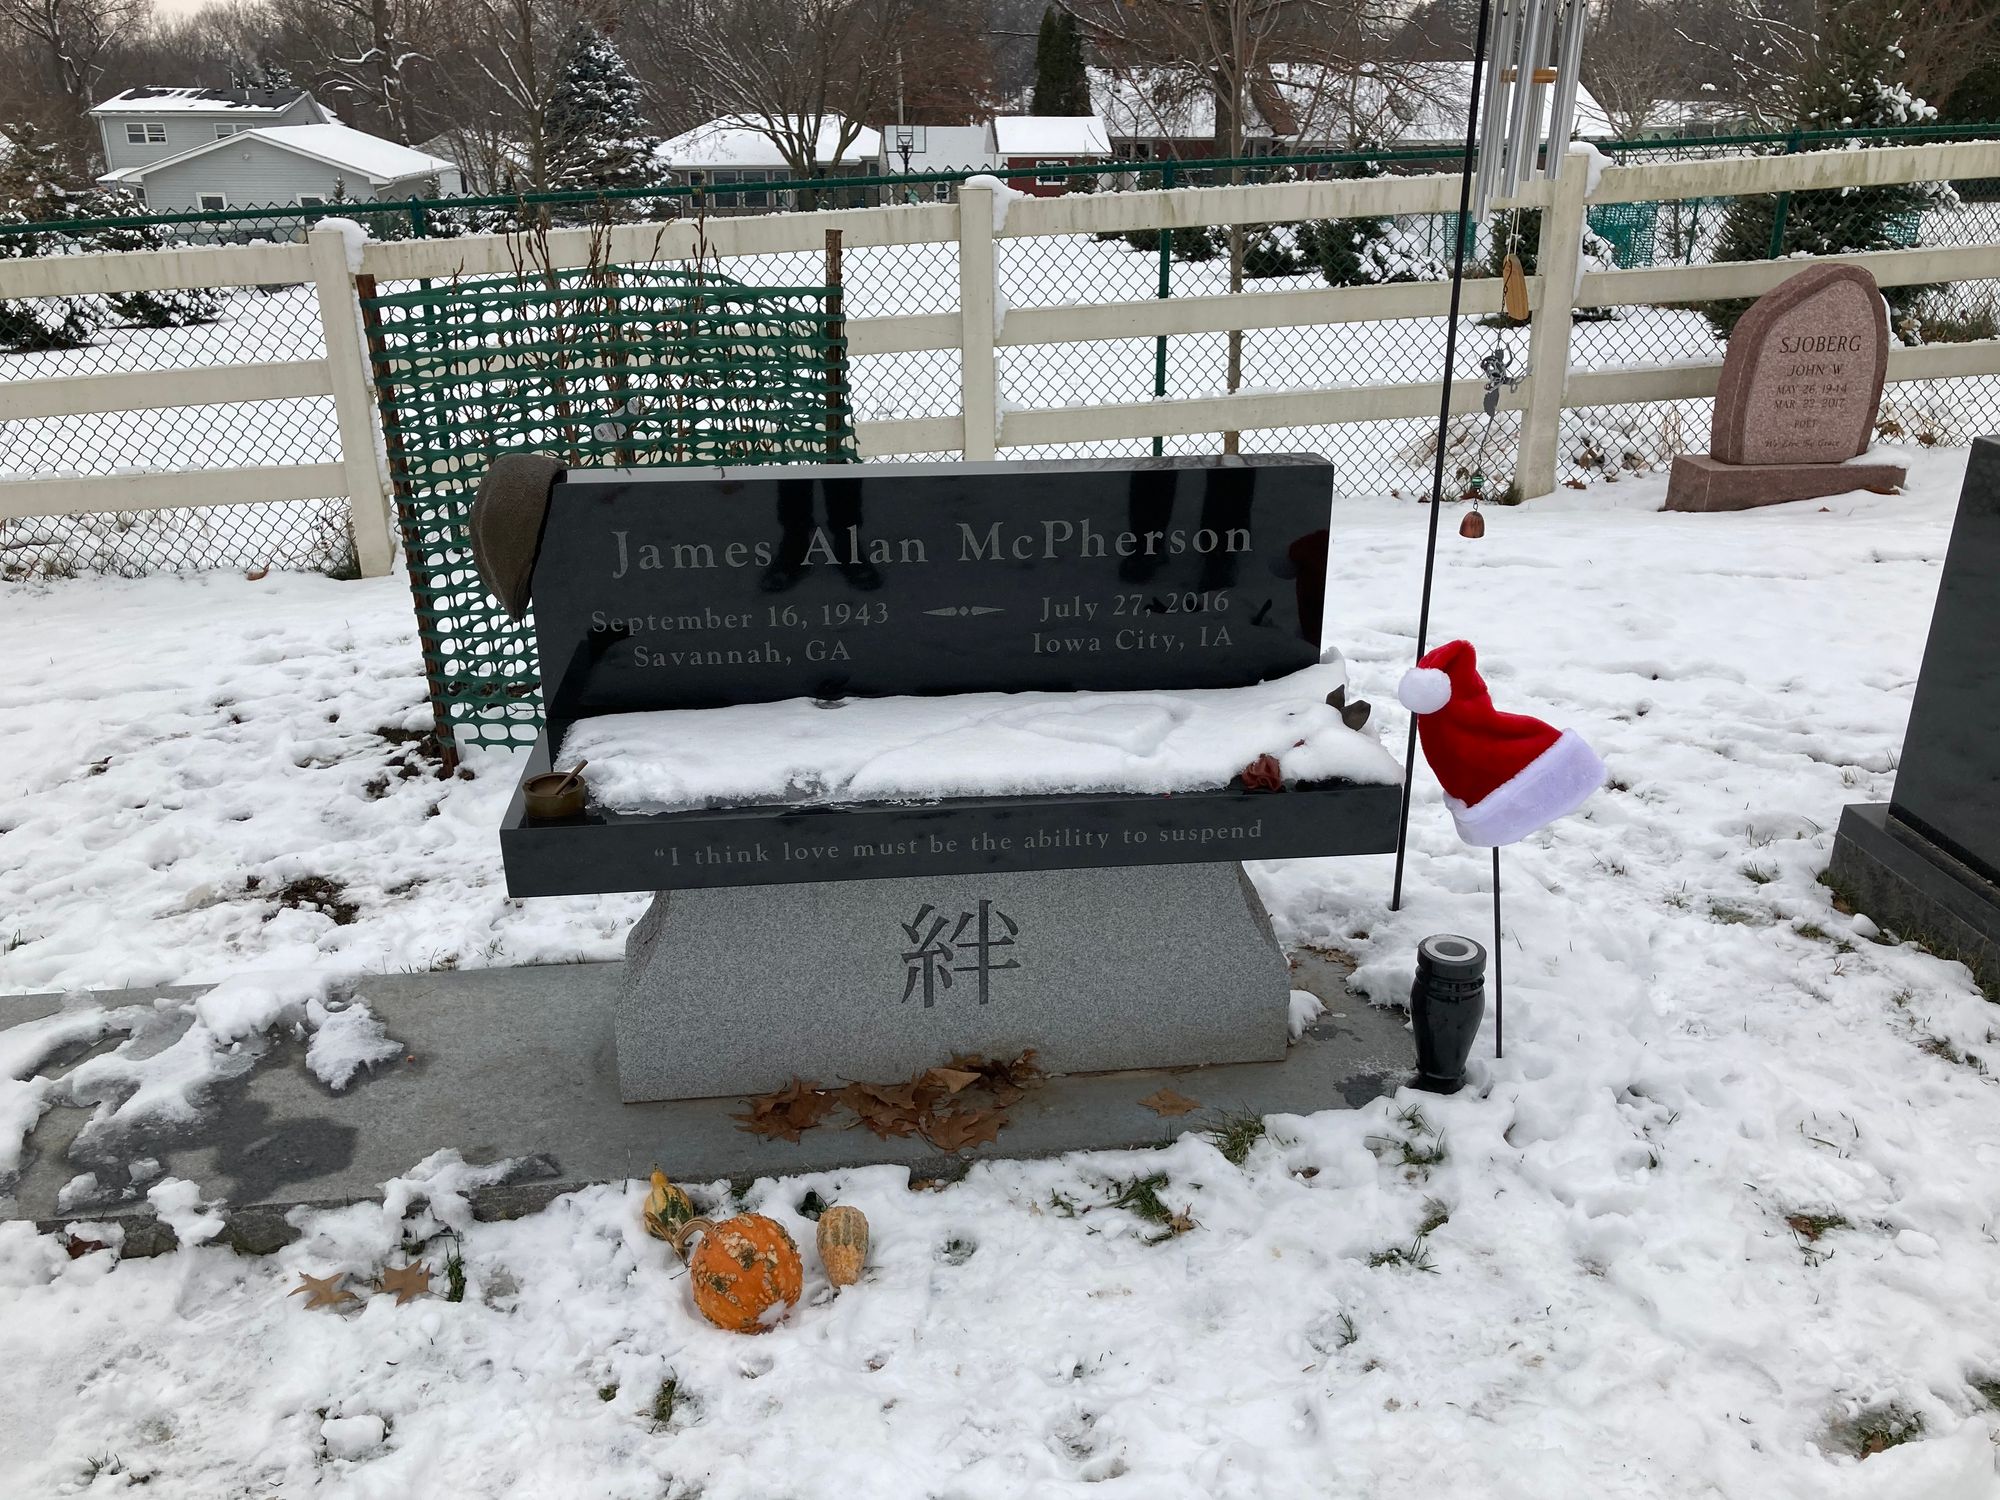 A black headstone surrounded by snow